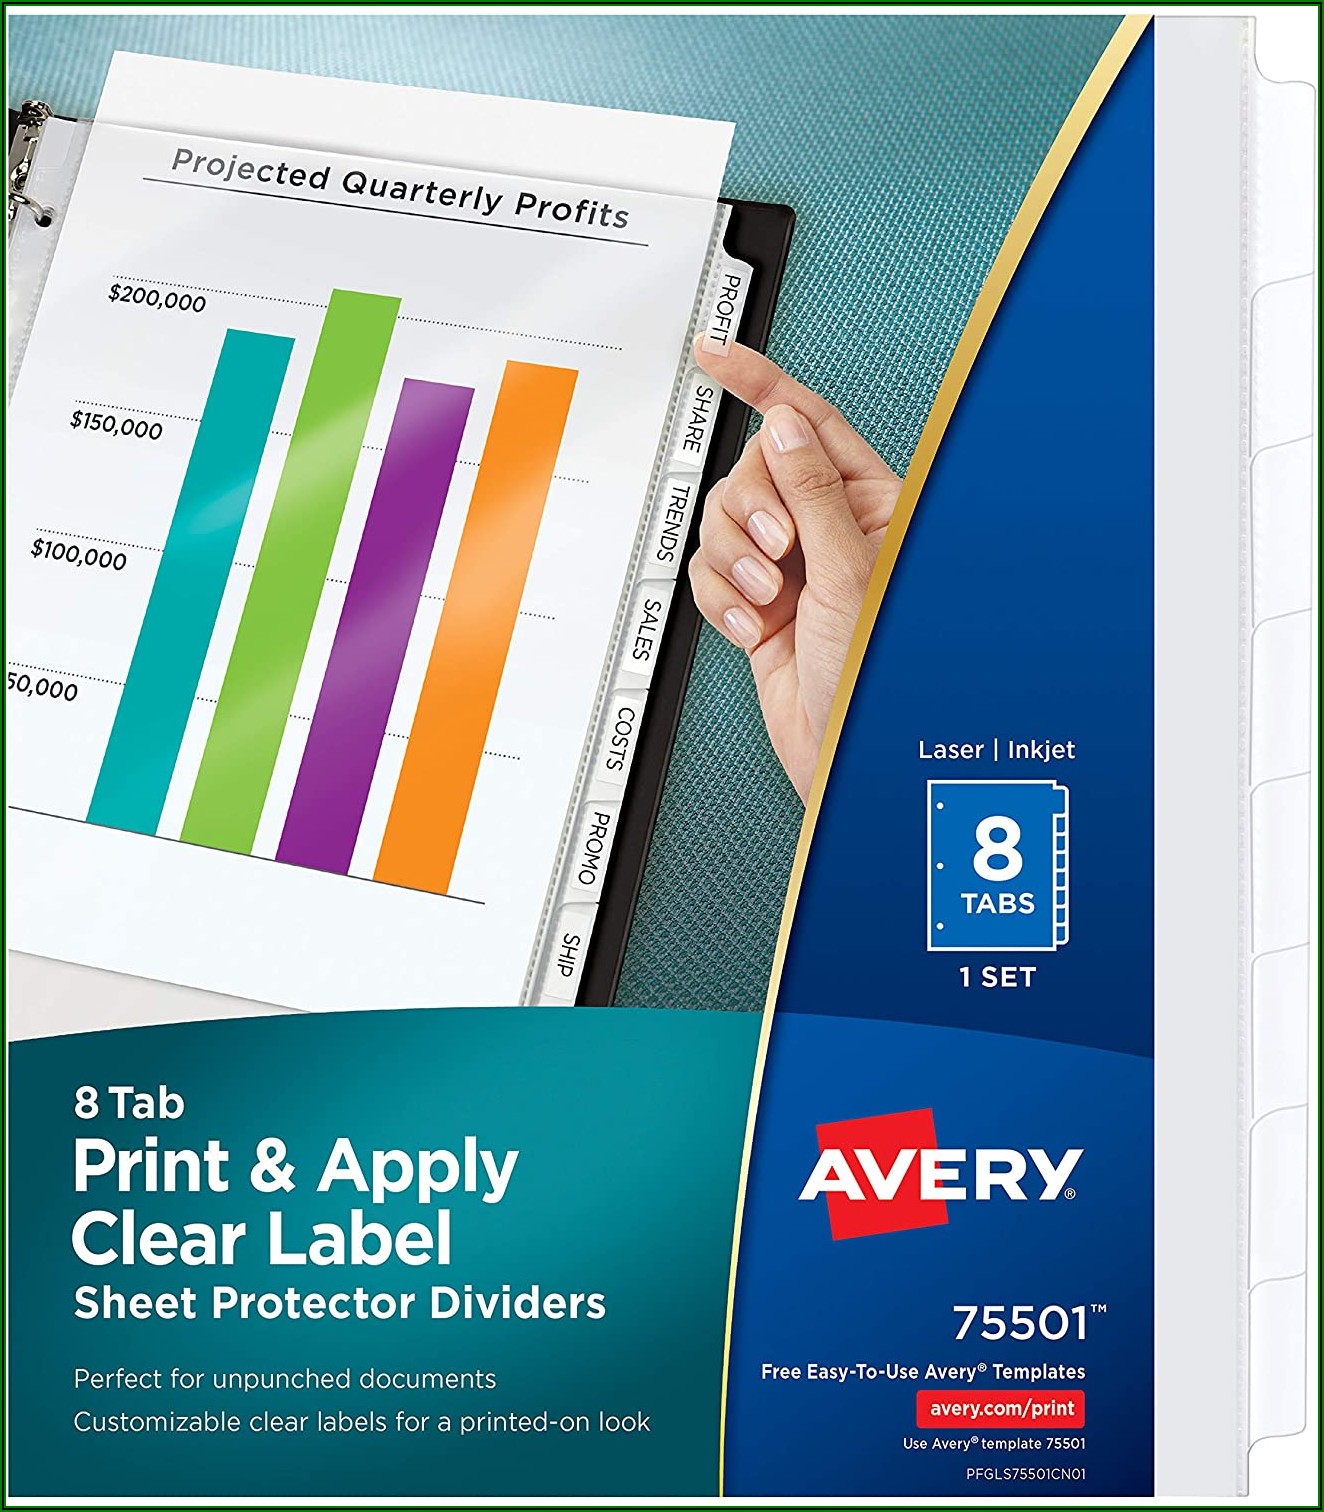 Avery 8 Tab Clear Label Dividers Template